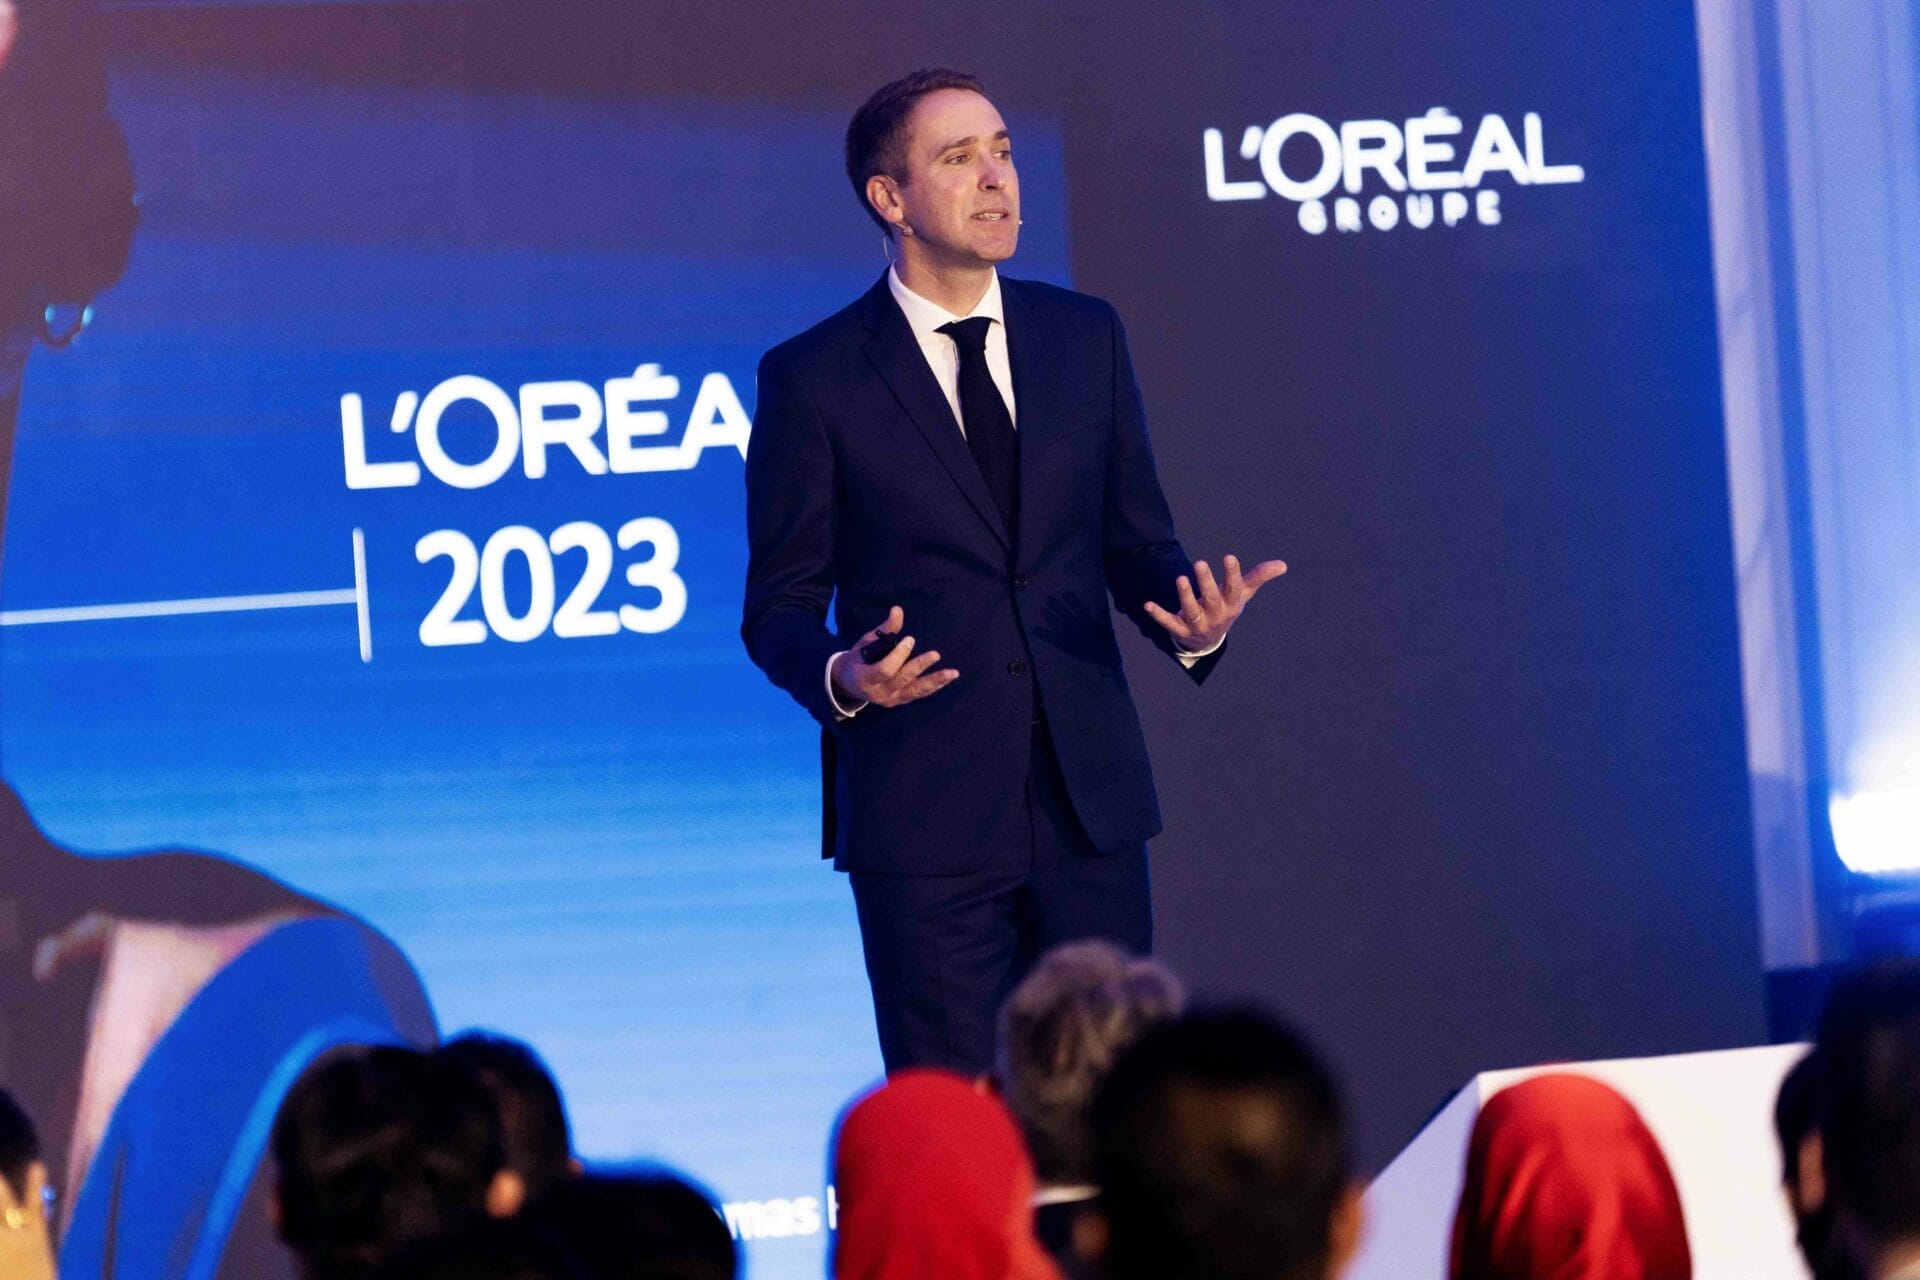 Presentation by Managing Director, Mr. Tomas Hruska at L'Oréal Groupe Corporate Showcase Event which was on the brand's commitment on beauty that moves the world